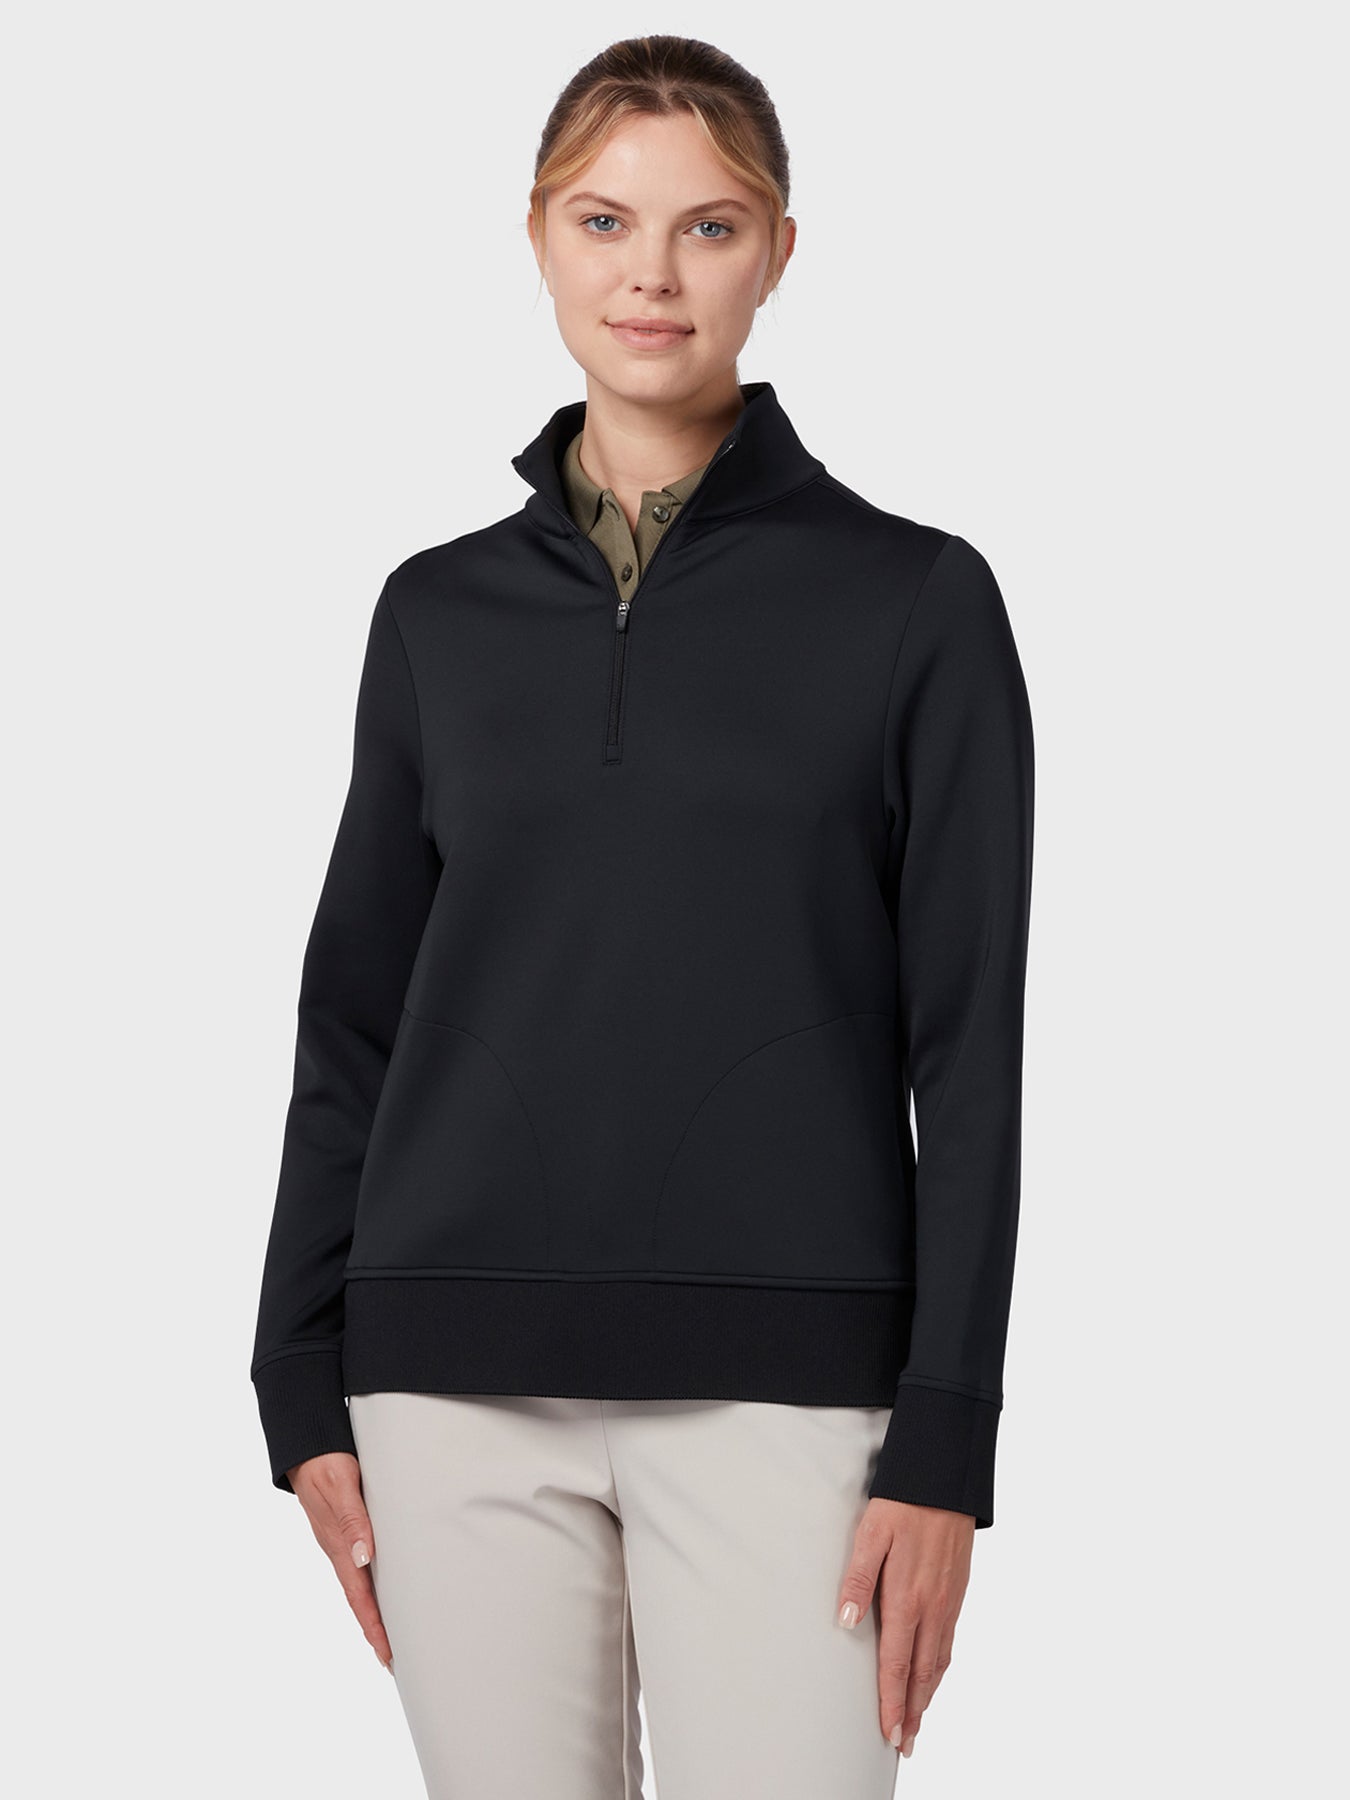 View Midweight Womens Fleece Crossover In Caviar Caviar XS information